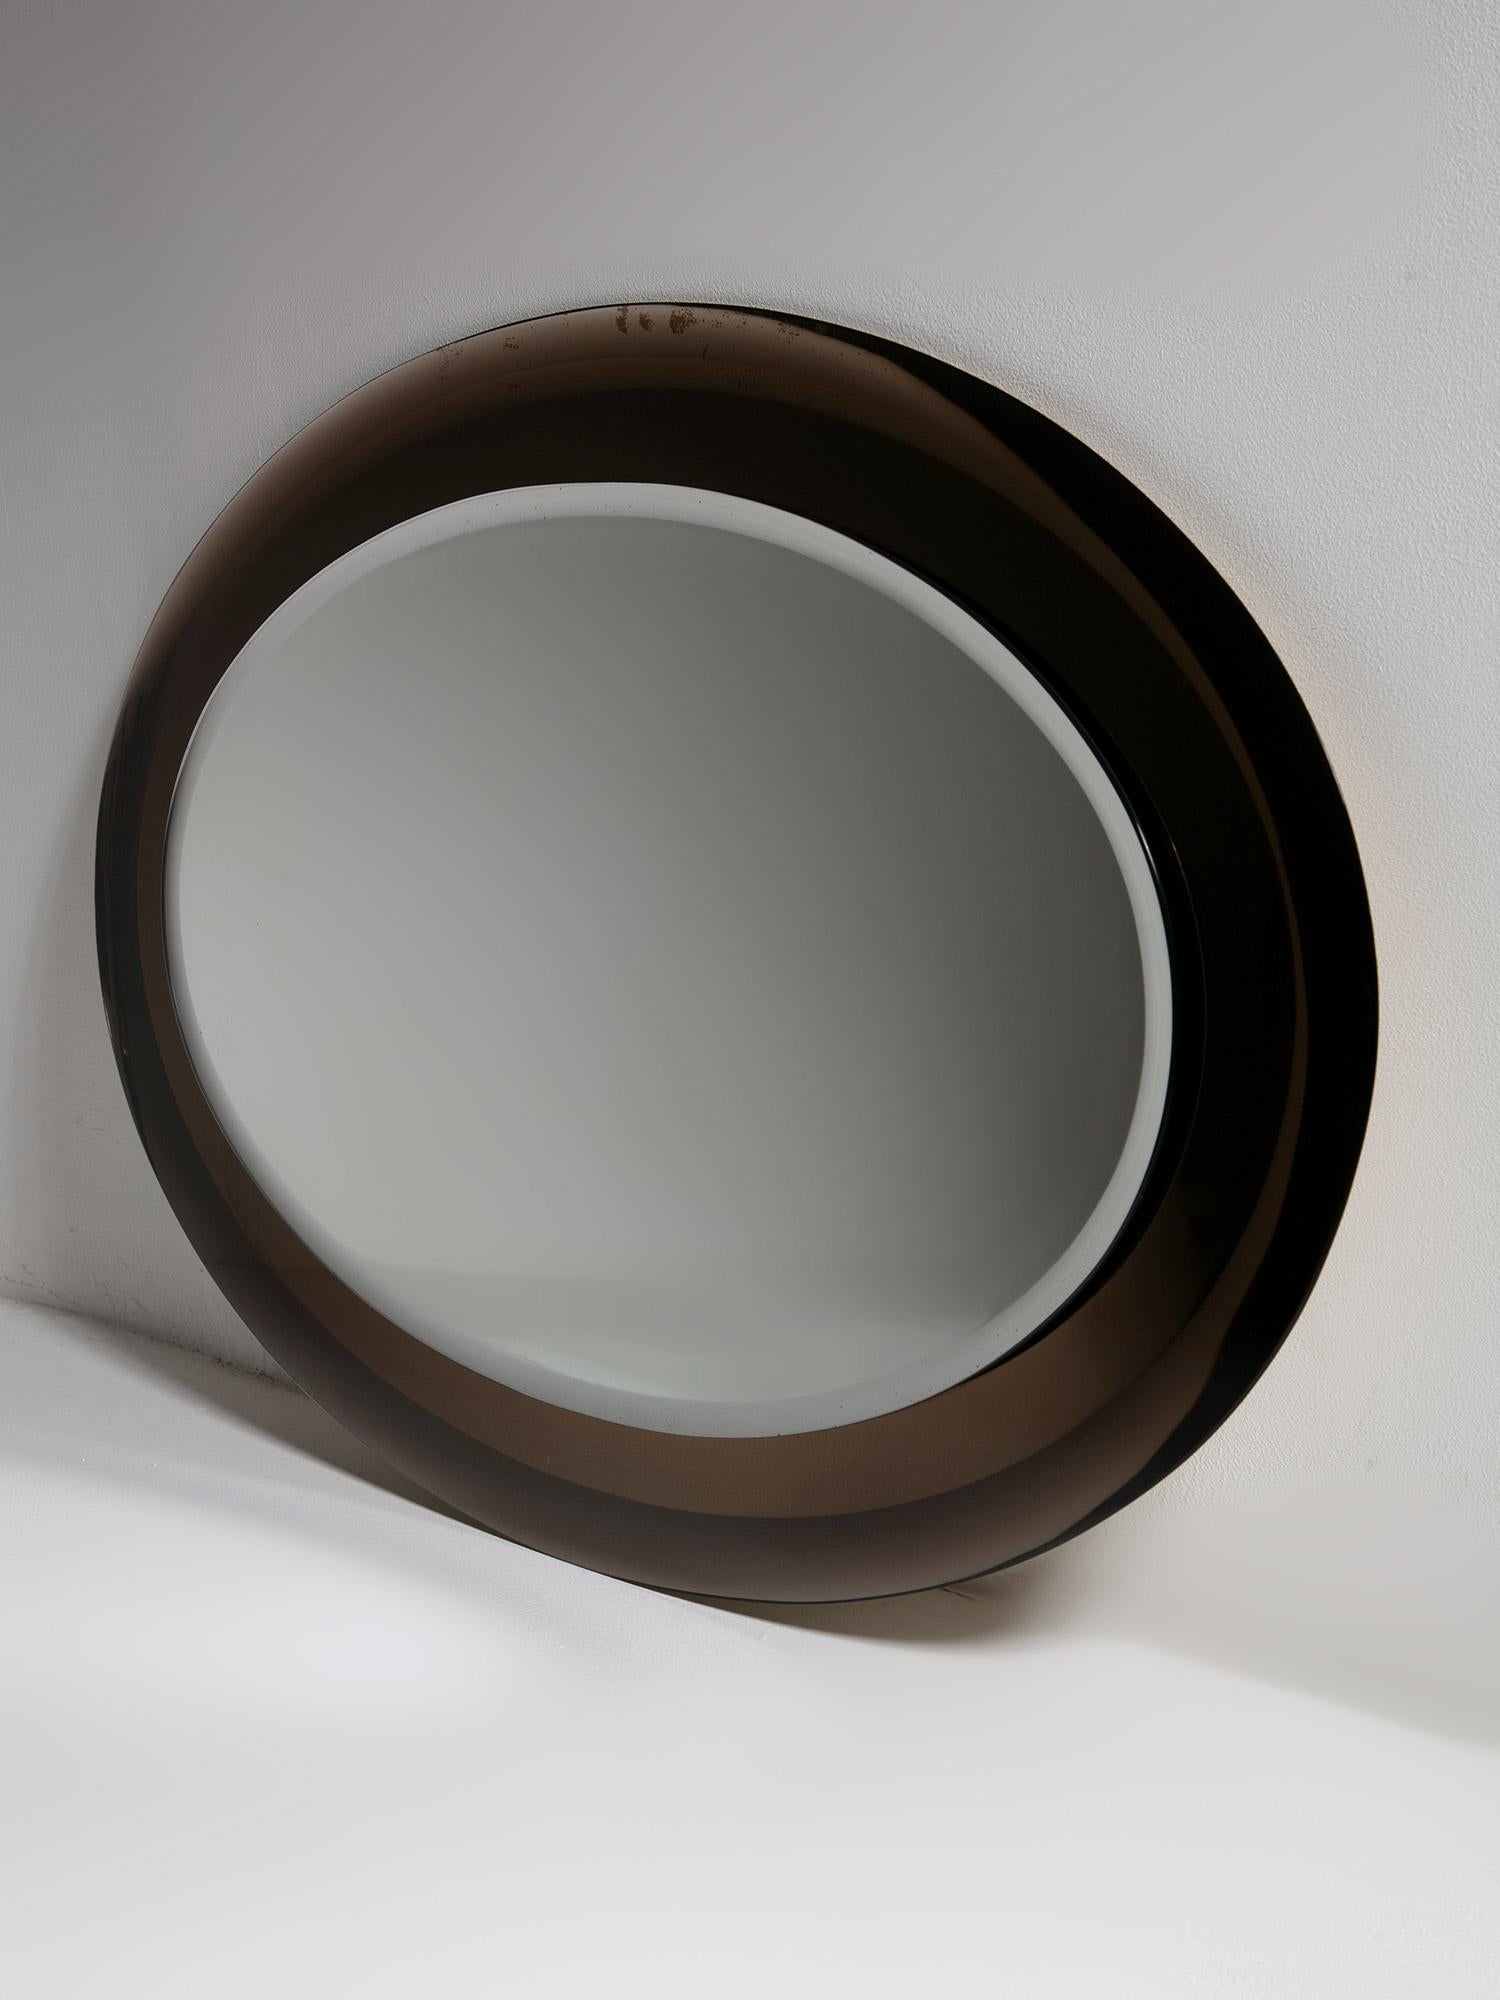 Late 20th Century Large Double Bevelled Oval Wall Mirror, Metalvetro Galvorame, Italy, 1970s For Sale